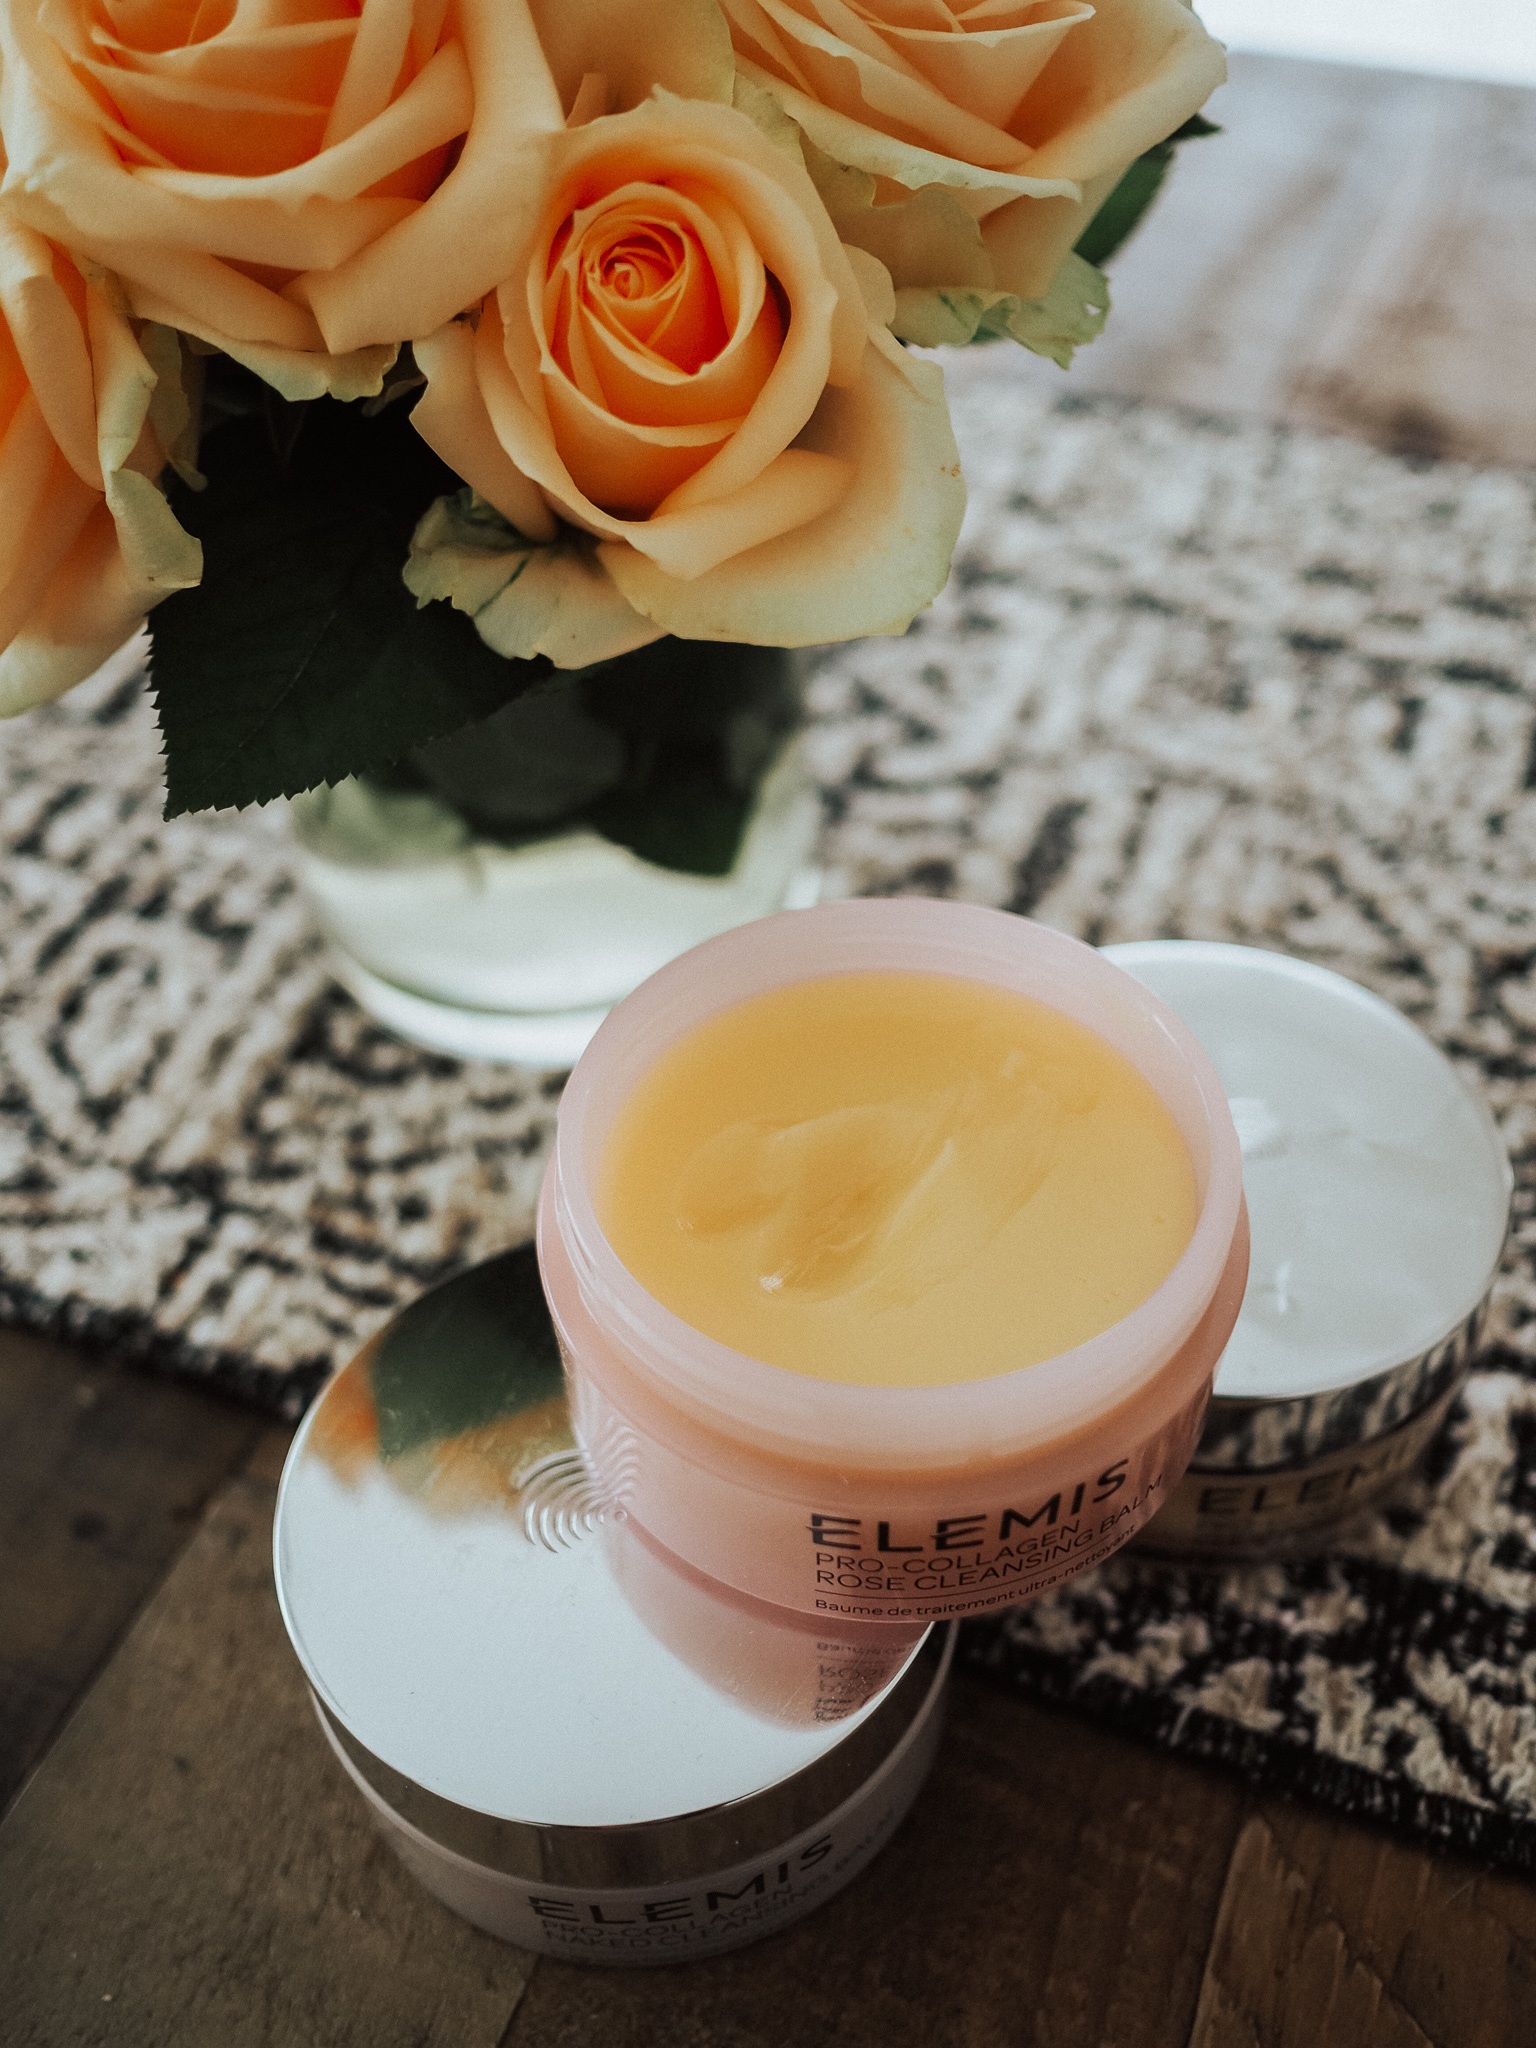 The Elemis cleansing balm line is hands down the best cleansing balm on the market - and Kelsey from B&B breaks down why.